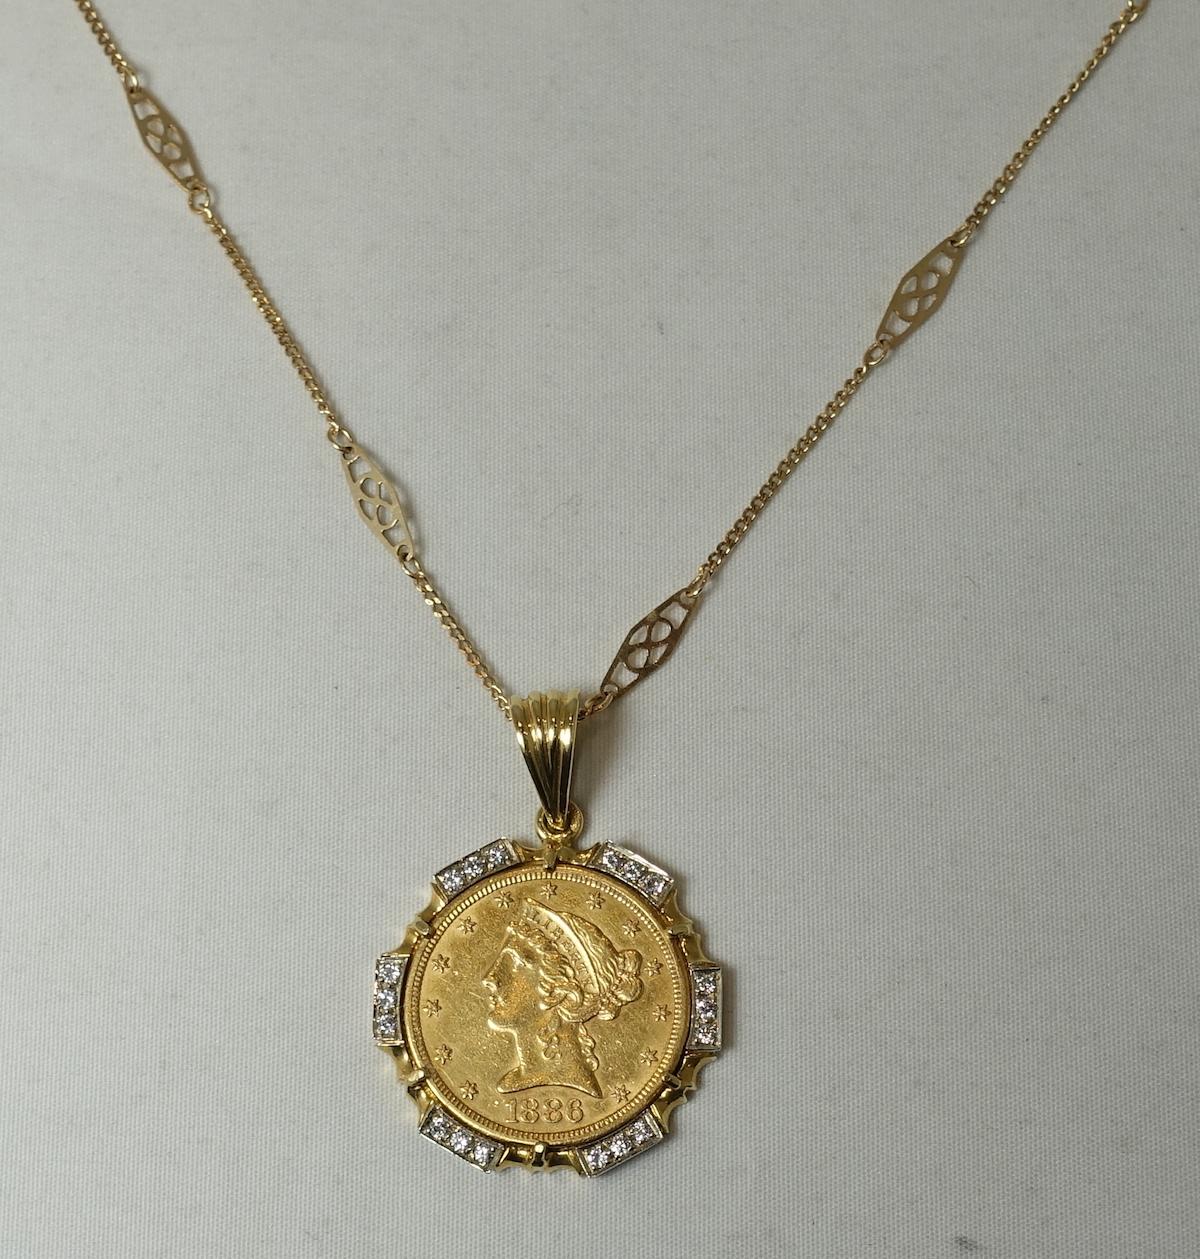 This is a stunning, custom made coin necklace features a 22 karat gold 1886 coin, with 3/4 carats of diamond accents with a 14 karat gold Deco chain necklace with spring clasp.  The 22 karat gold coin measures 1” in diameter/across; the 14 karat